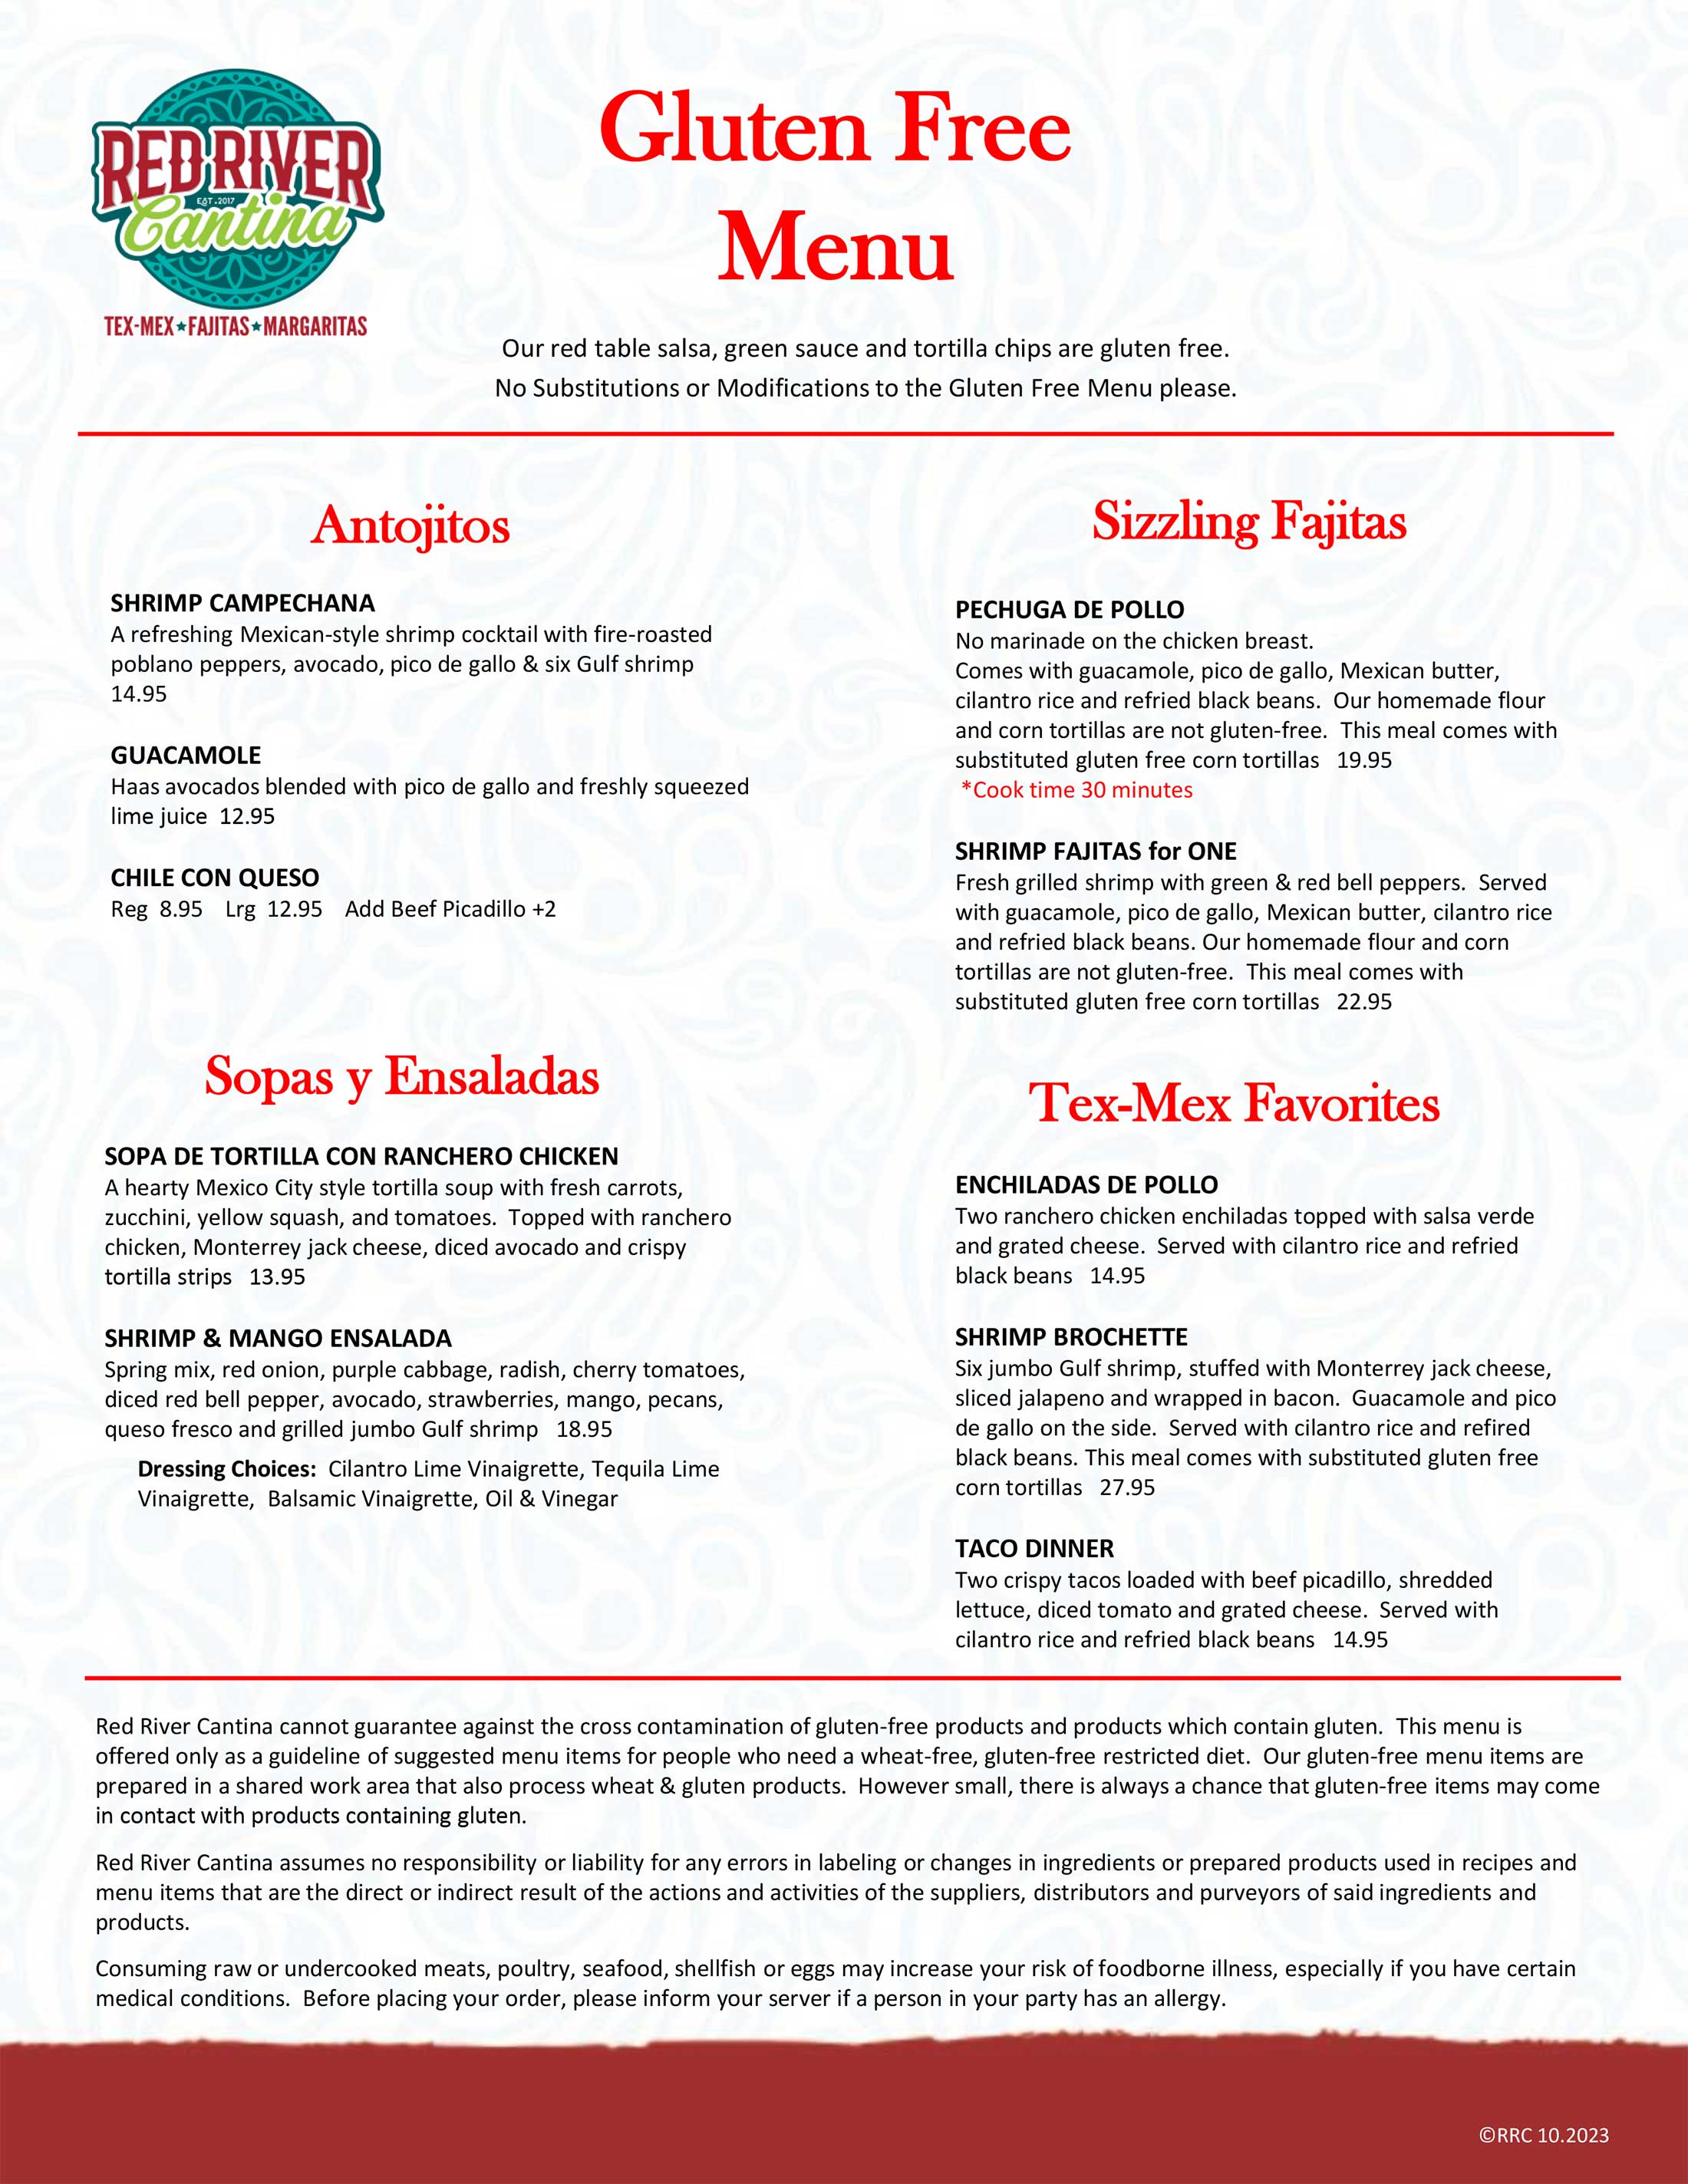 Gluten Free Mexican Dining